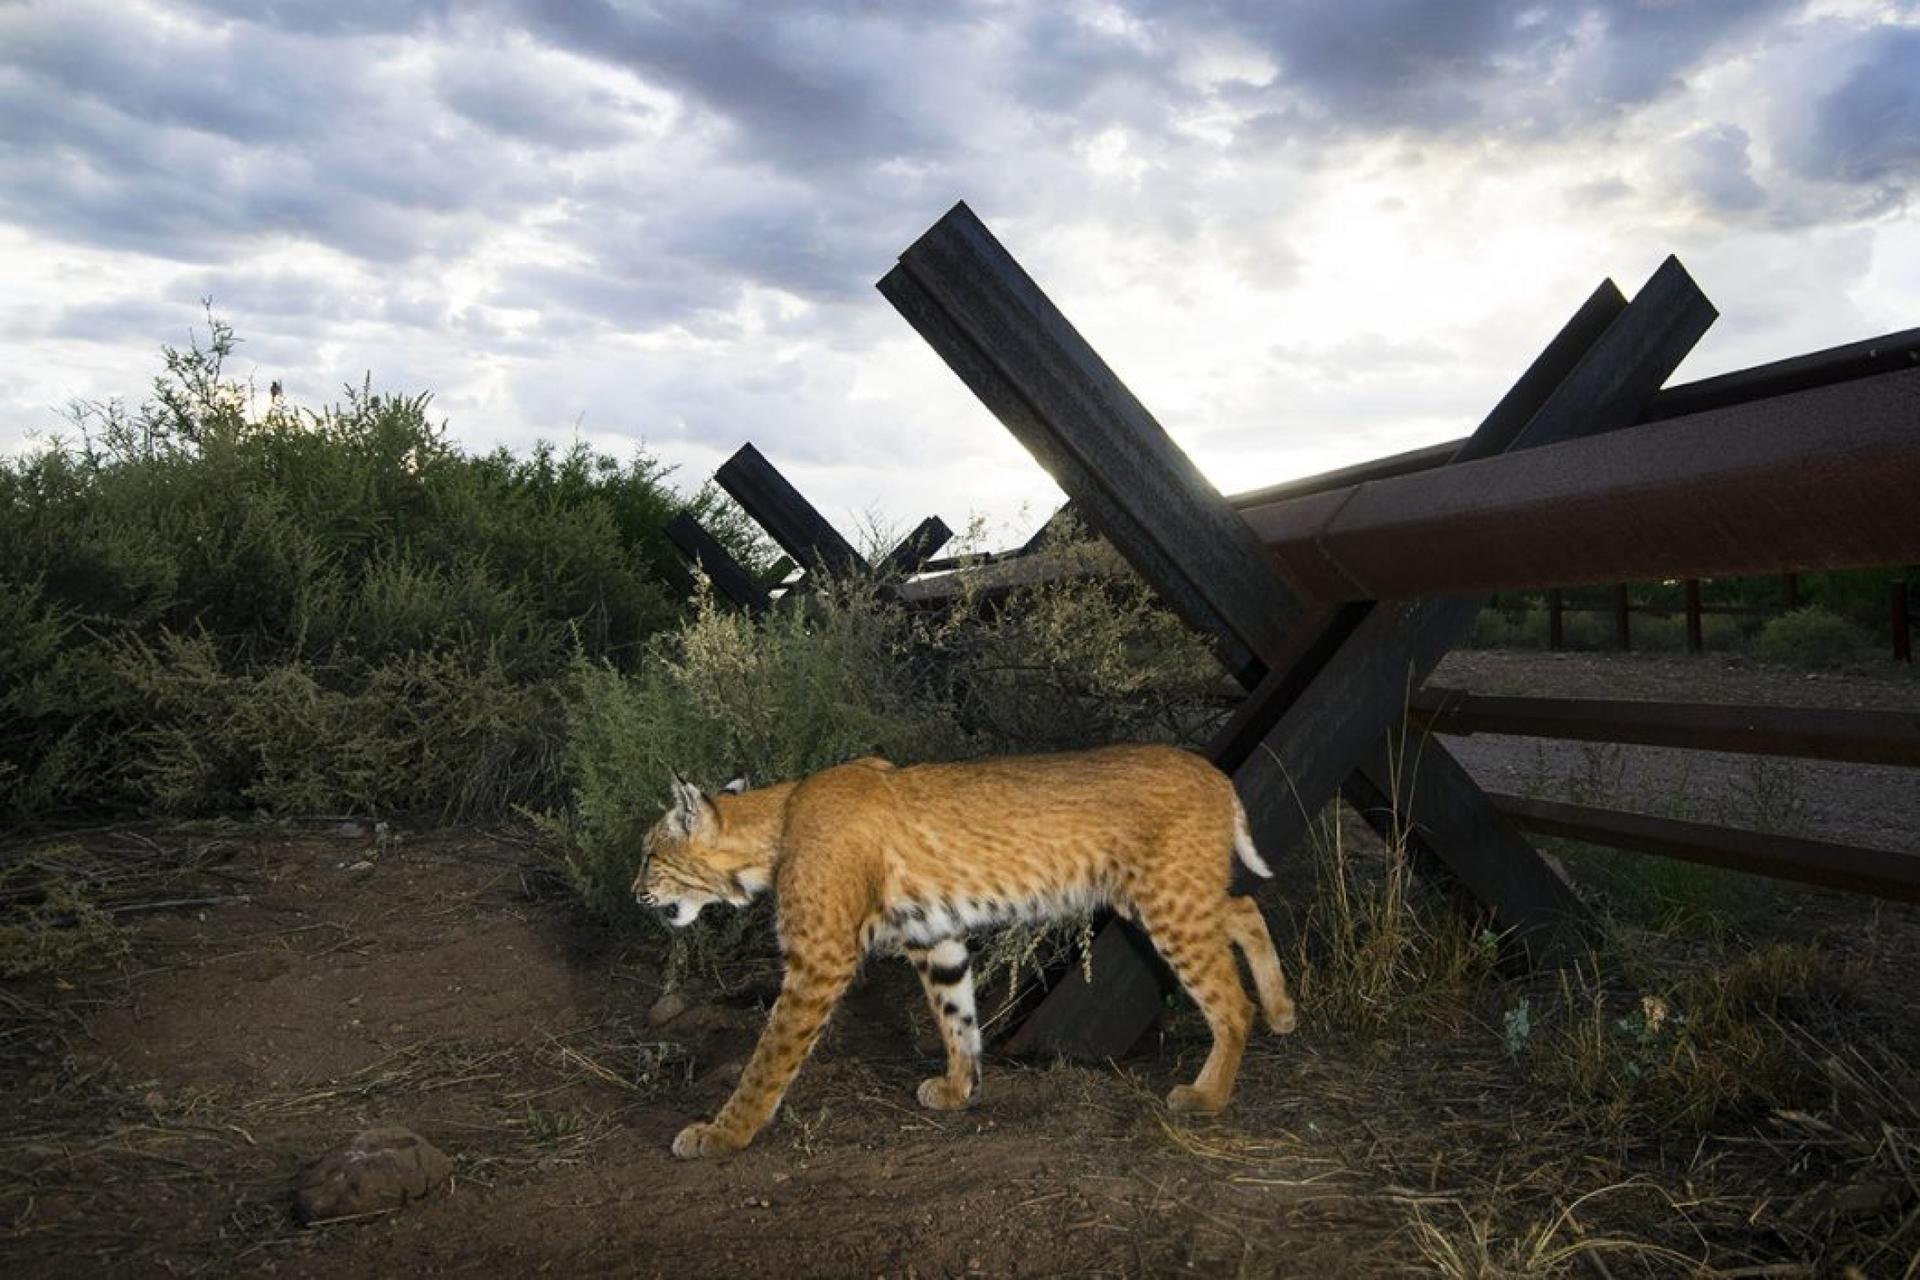 A bobcat is shown walking near a permeable metal section of the US-Mexico border.